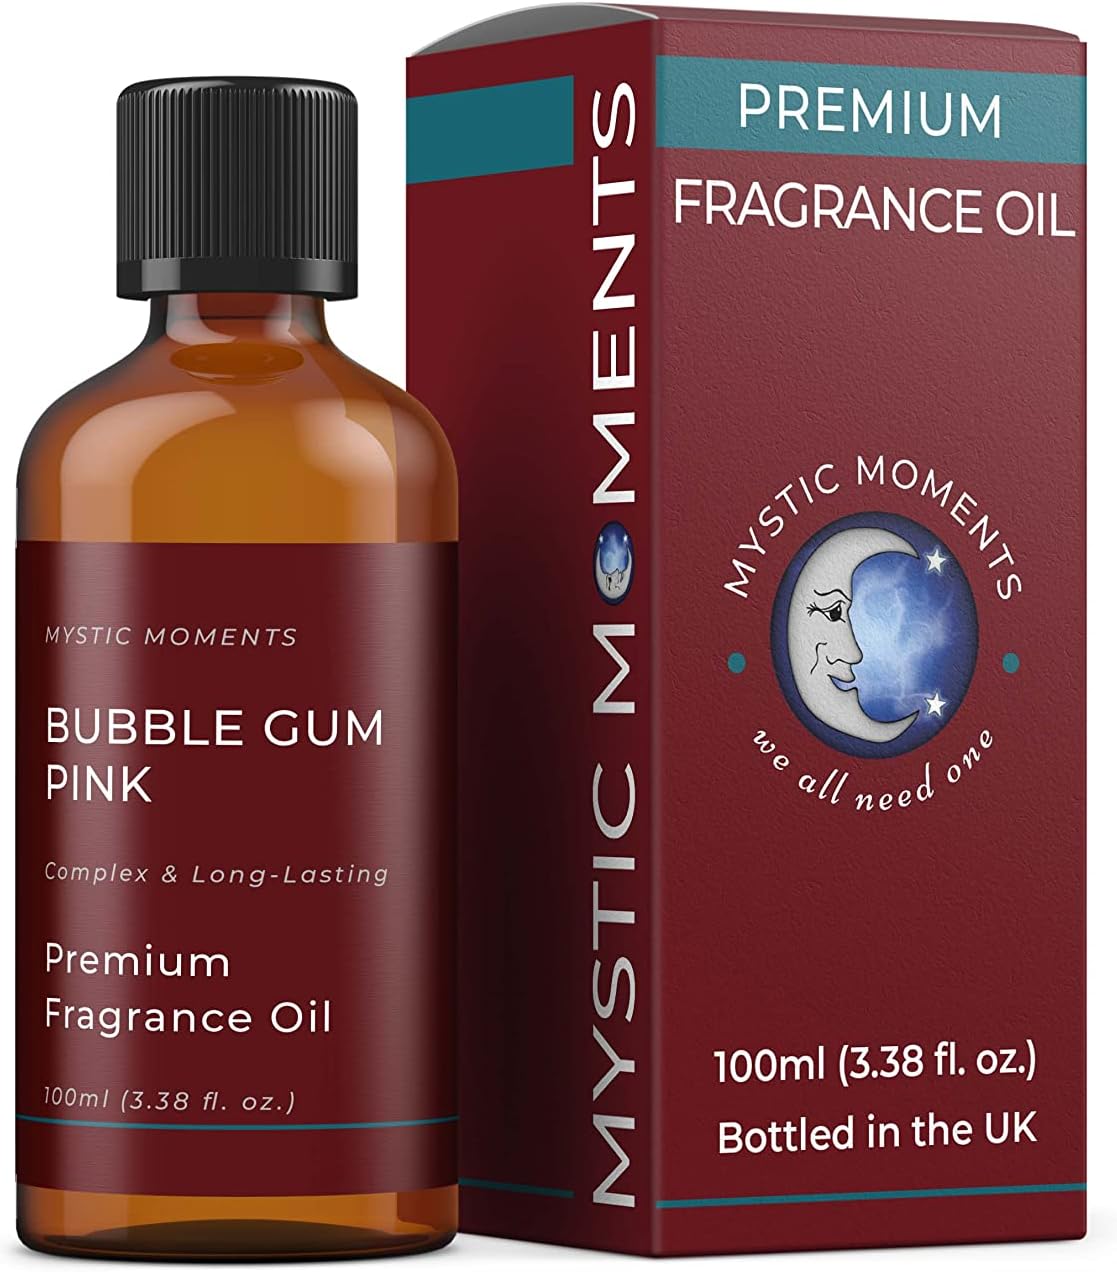 Mystic Moments | Bubble Gum Pink Fragrance Oil 100ml - Perfect for Soaps, Candles, Bath Bombs, Oil Burners, Diffusers and Skin & Hair Care Items